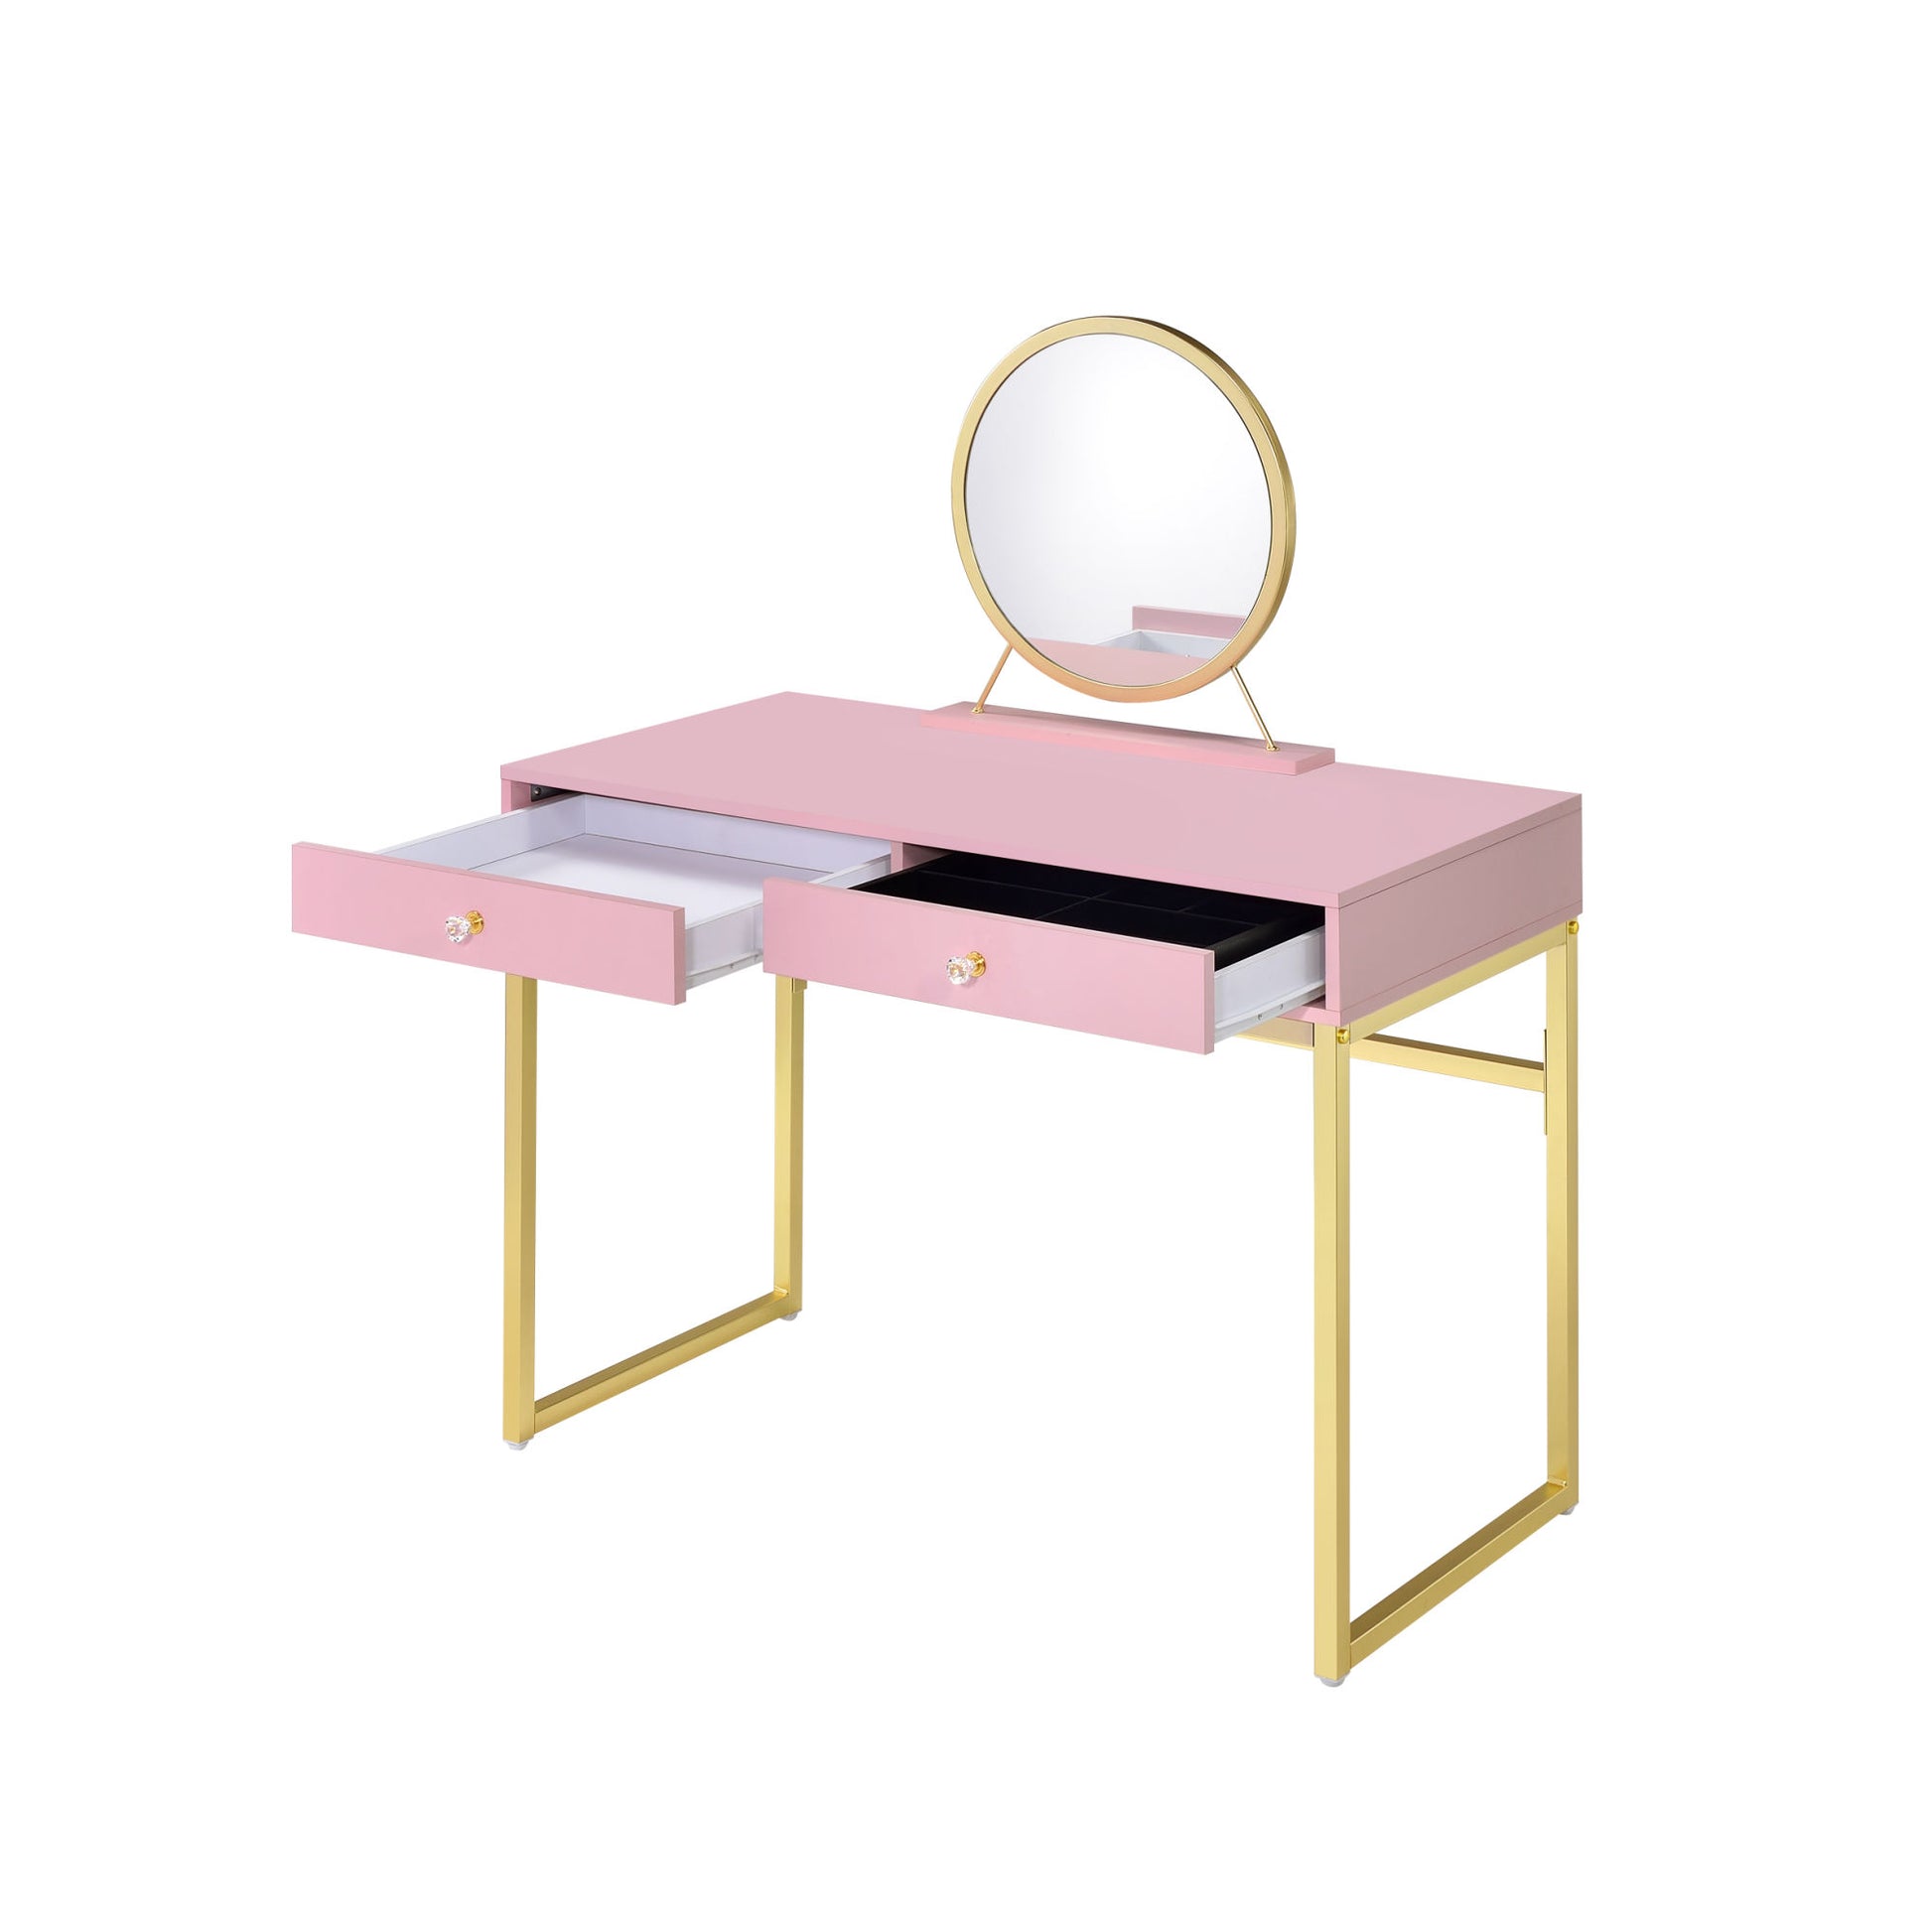 ACME Coleen Vanity Desk w/Mirror & Jewelry Tray in Pink & Gold Finish AC00668 - lolaluxeshop